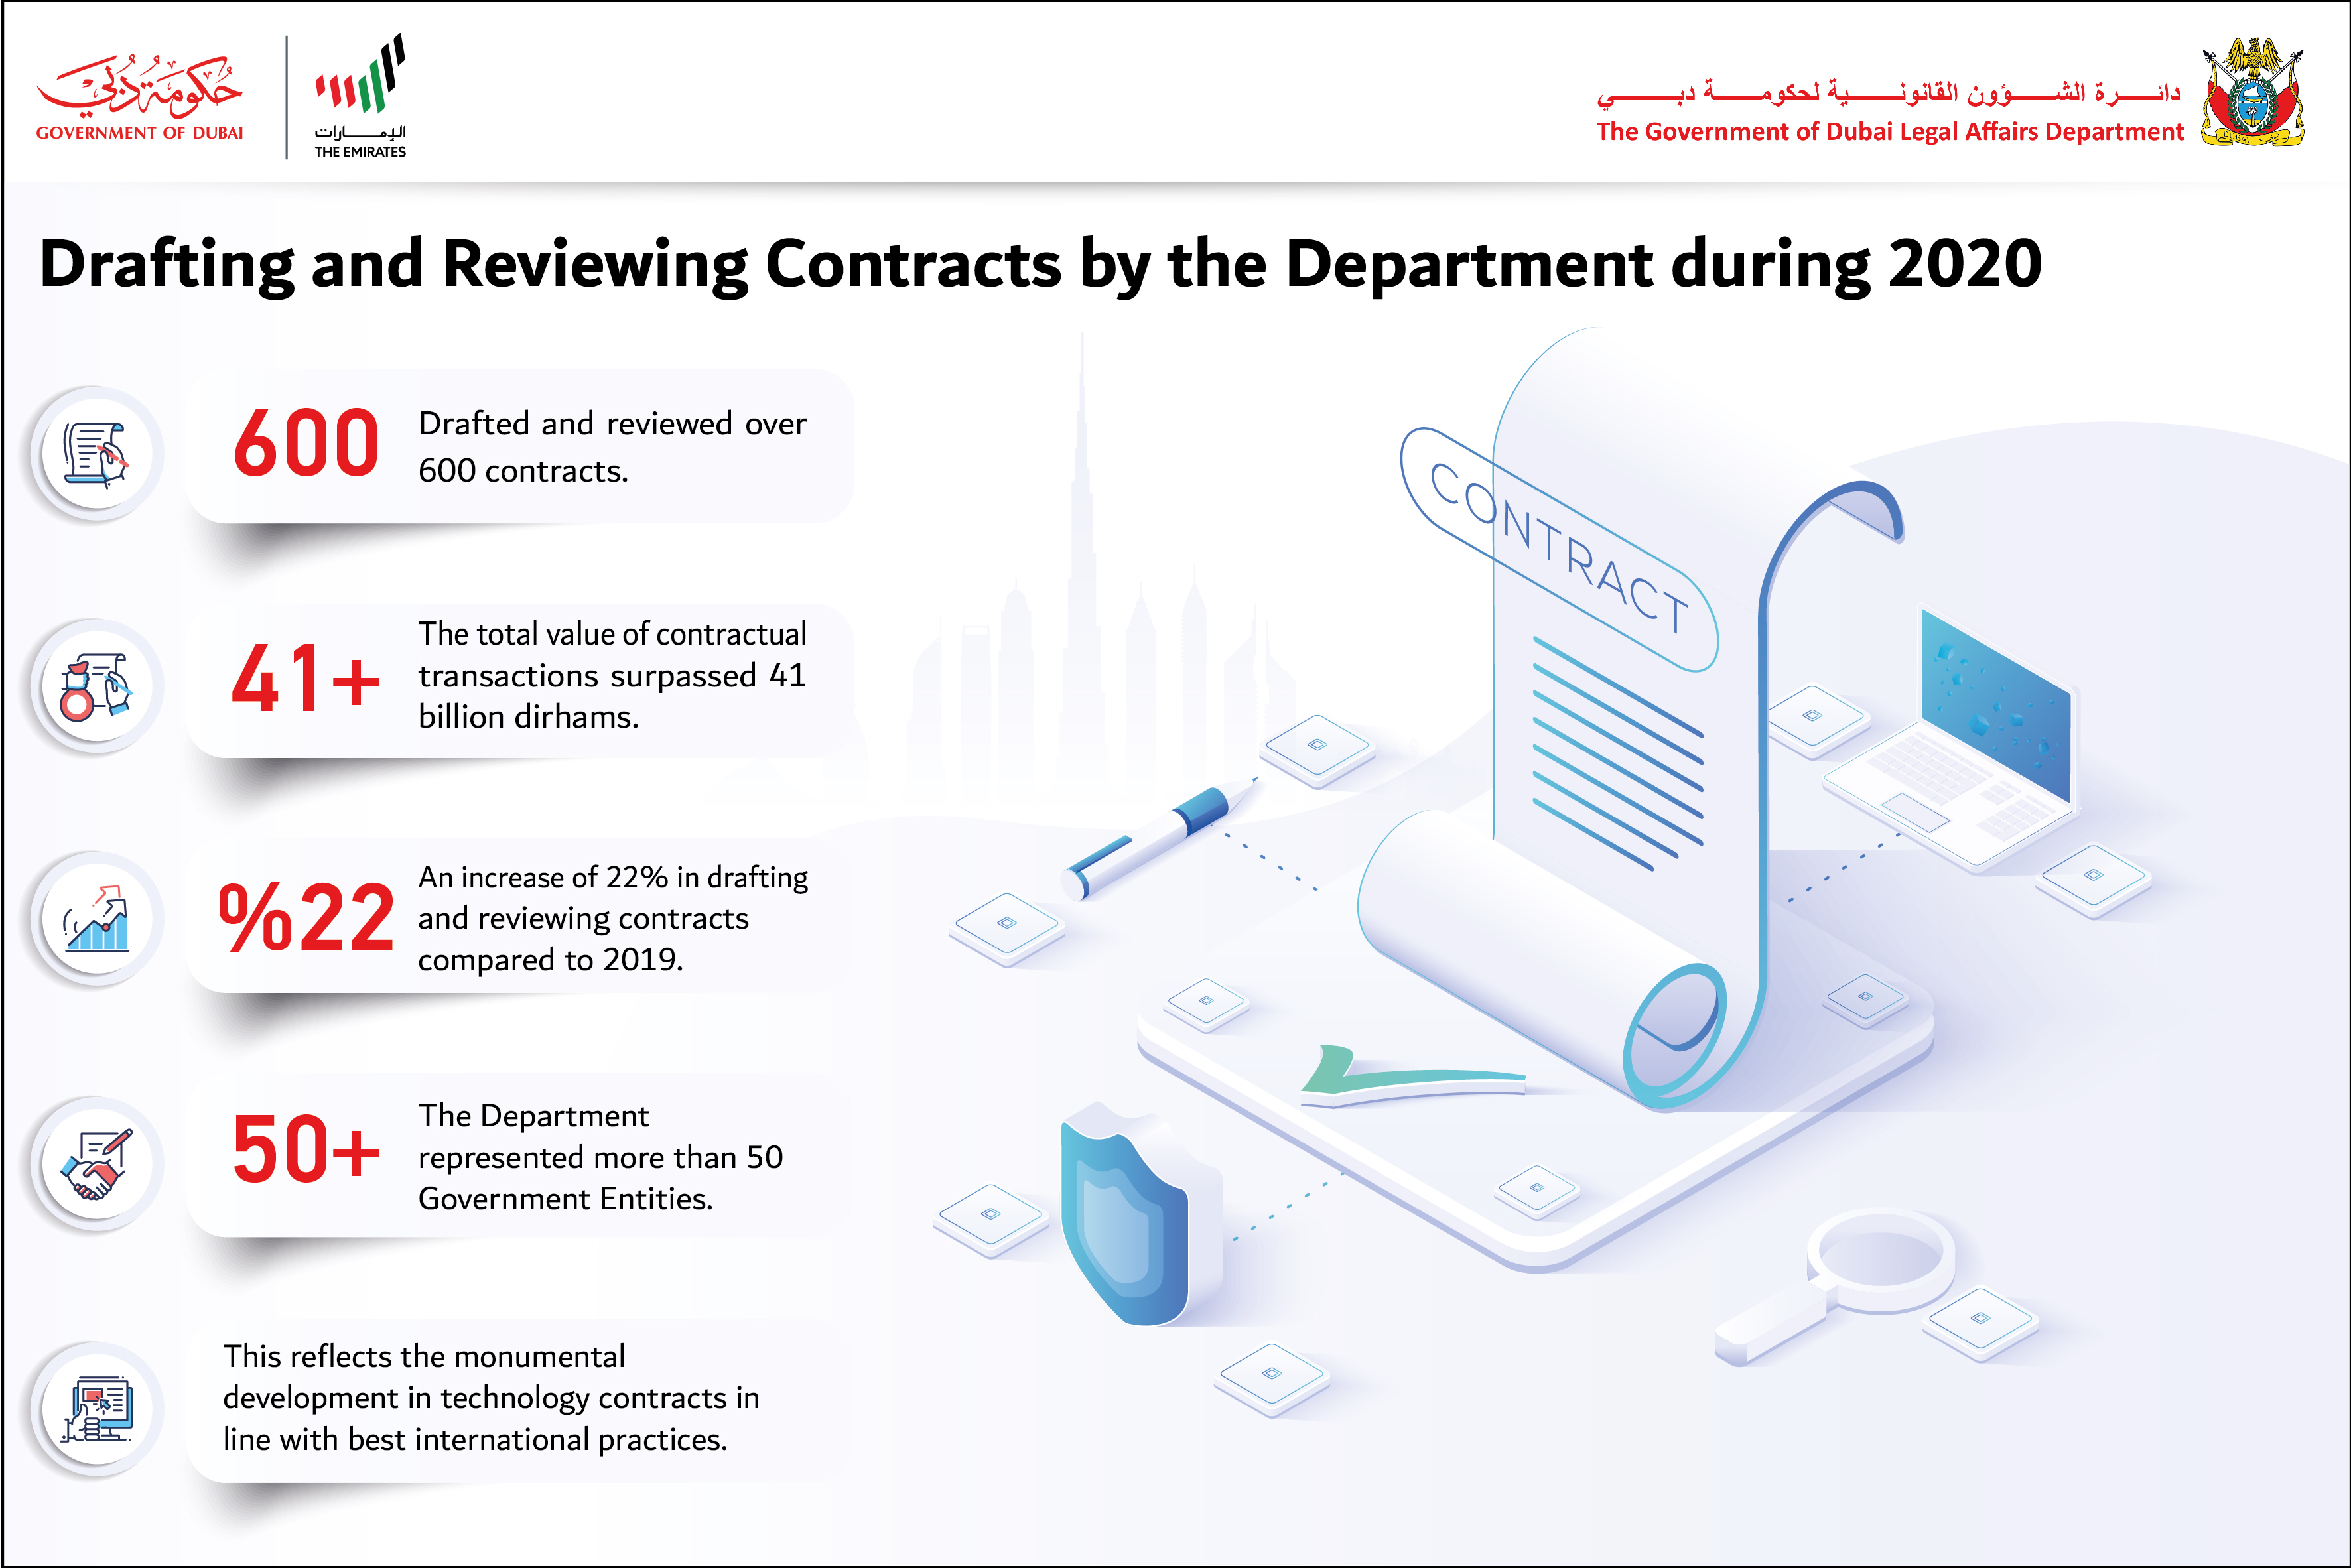 Over (41) billion dirhams Worth of Contracts Completed by Dubai Legal over the past year